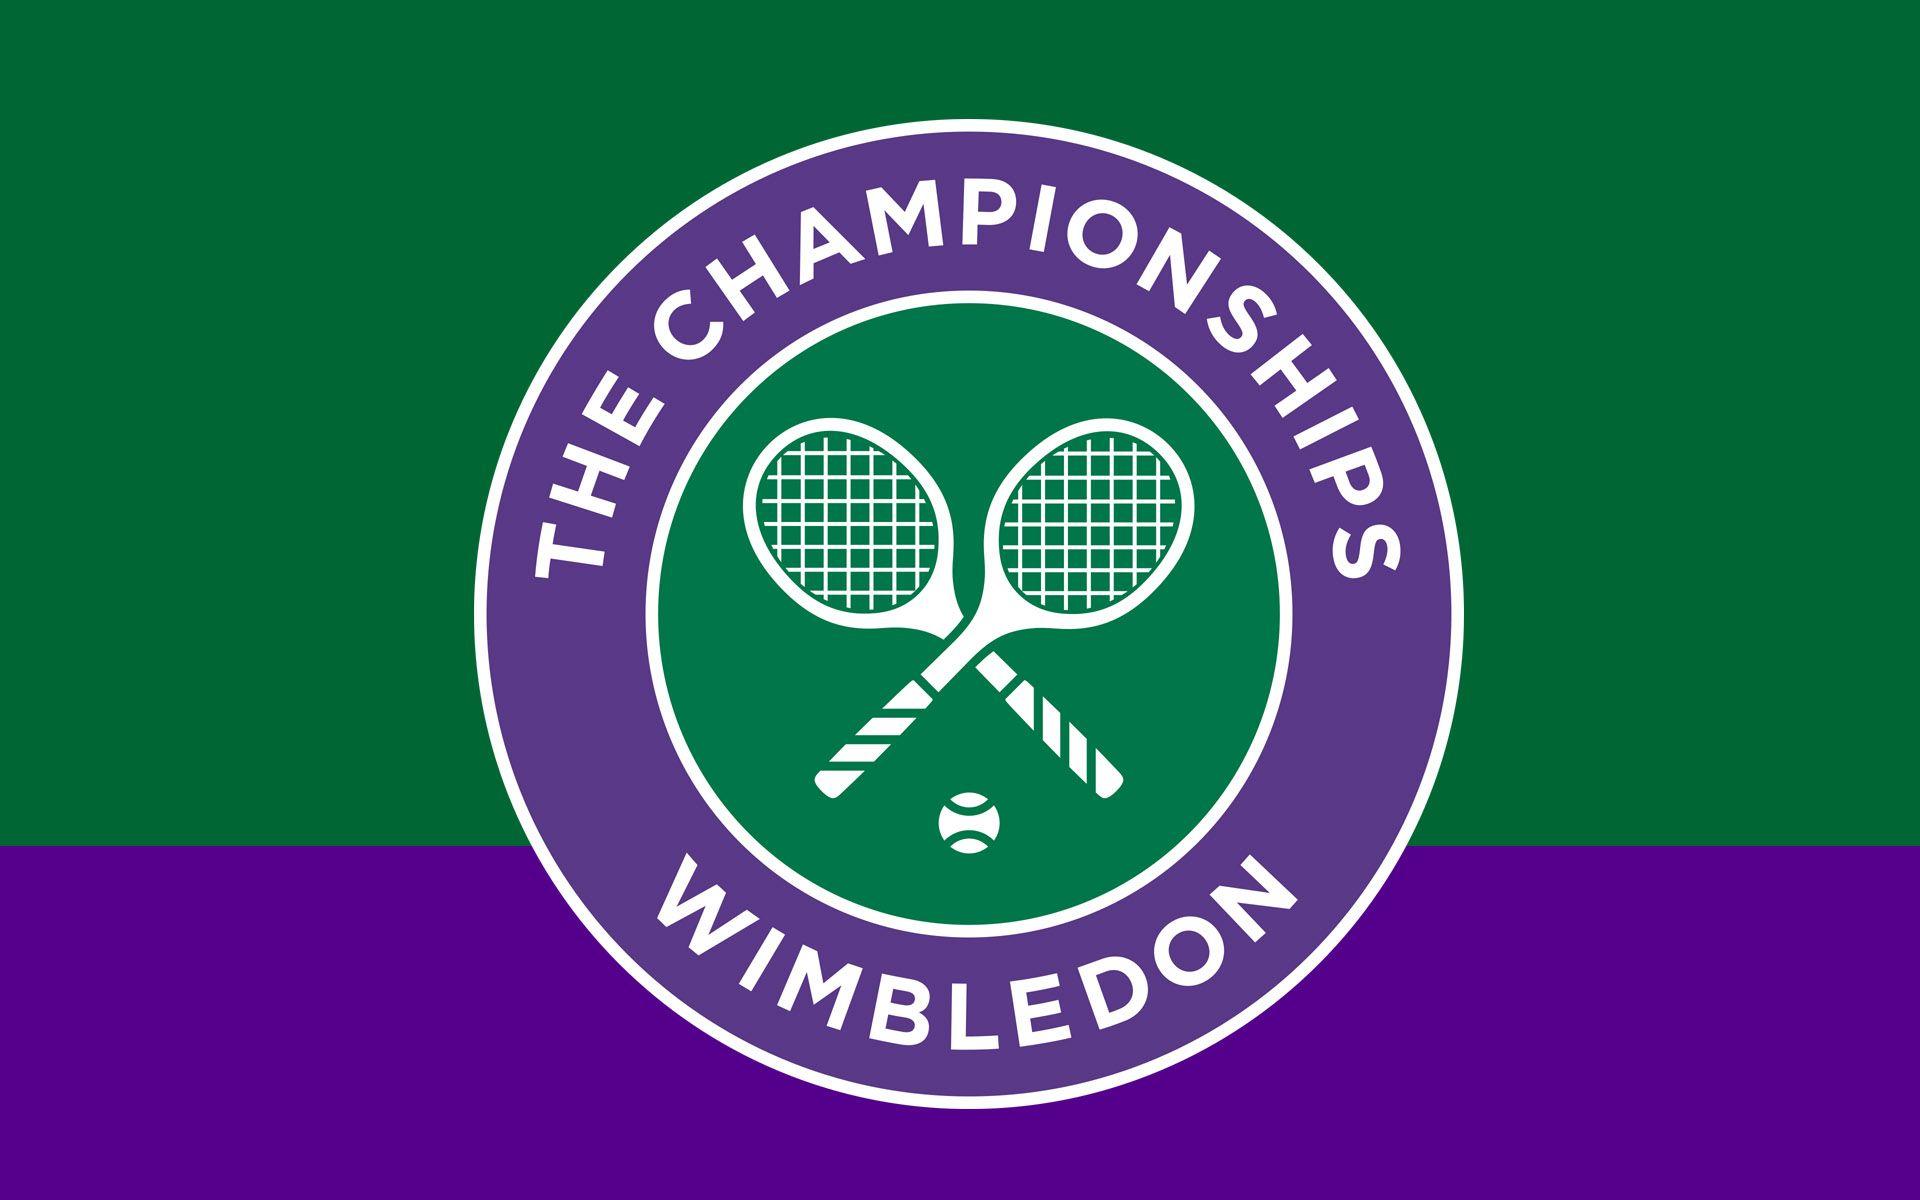 The Championships Wimbledon 2014 Logo Wallpapers Wide or HD